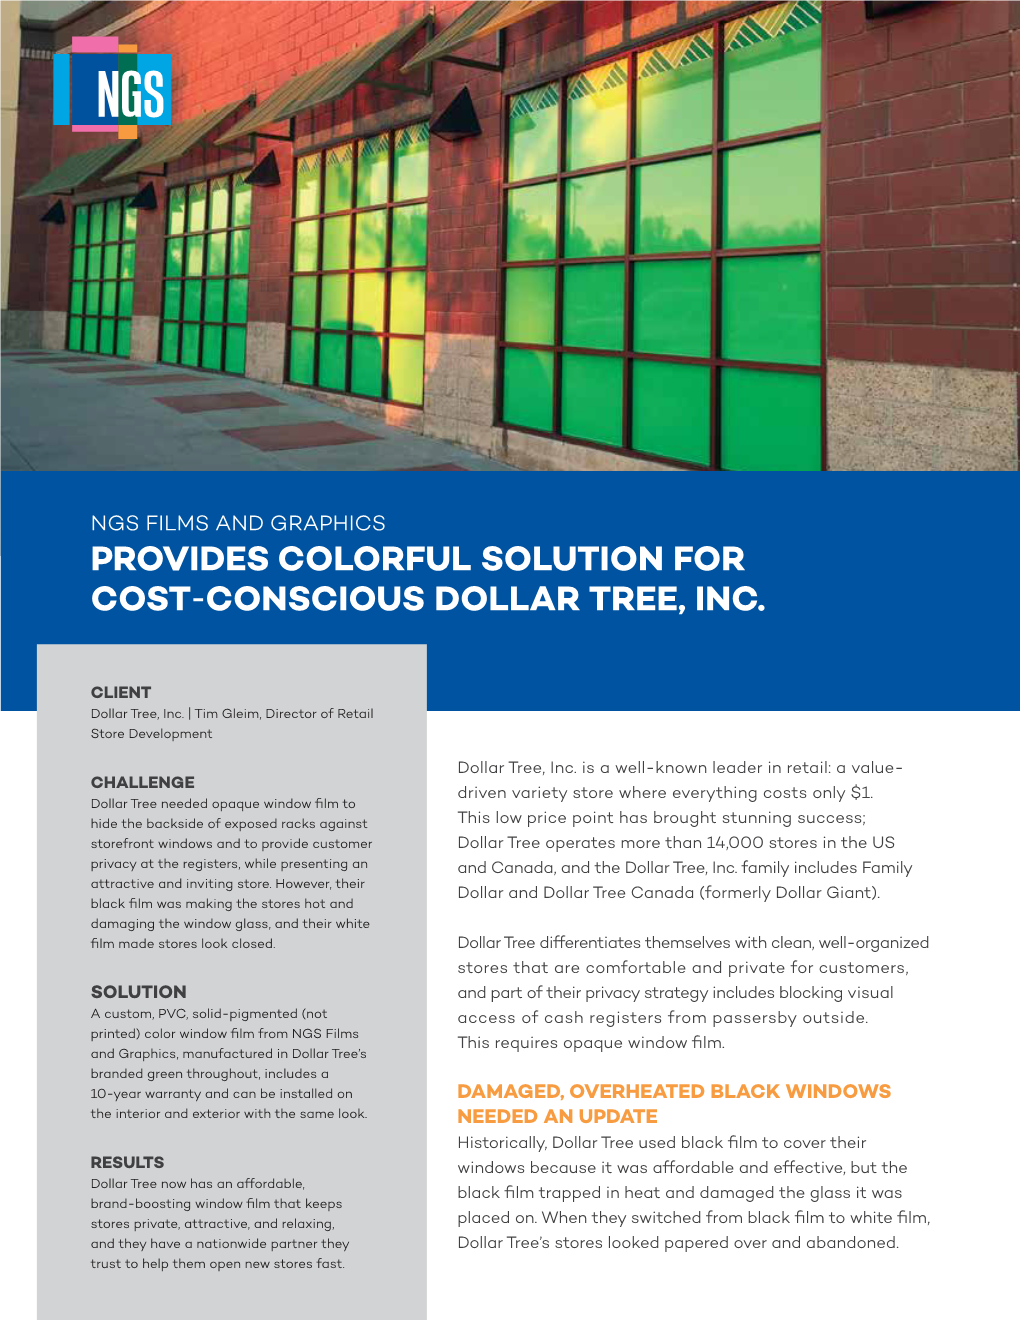 Provides Colorful Solution for Cost-Conscious Dollar